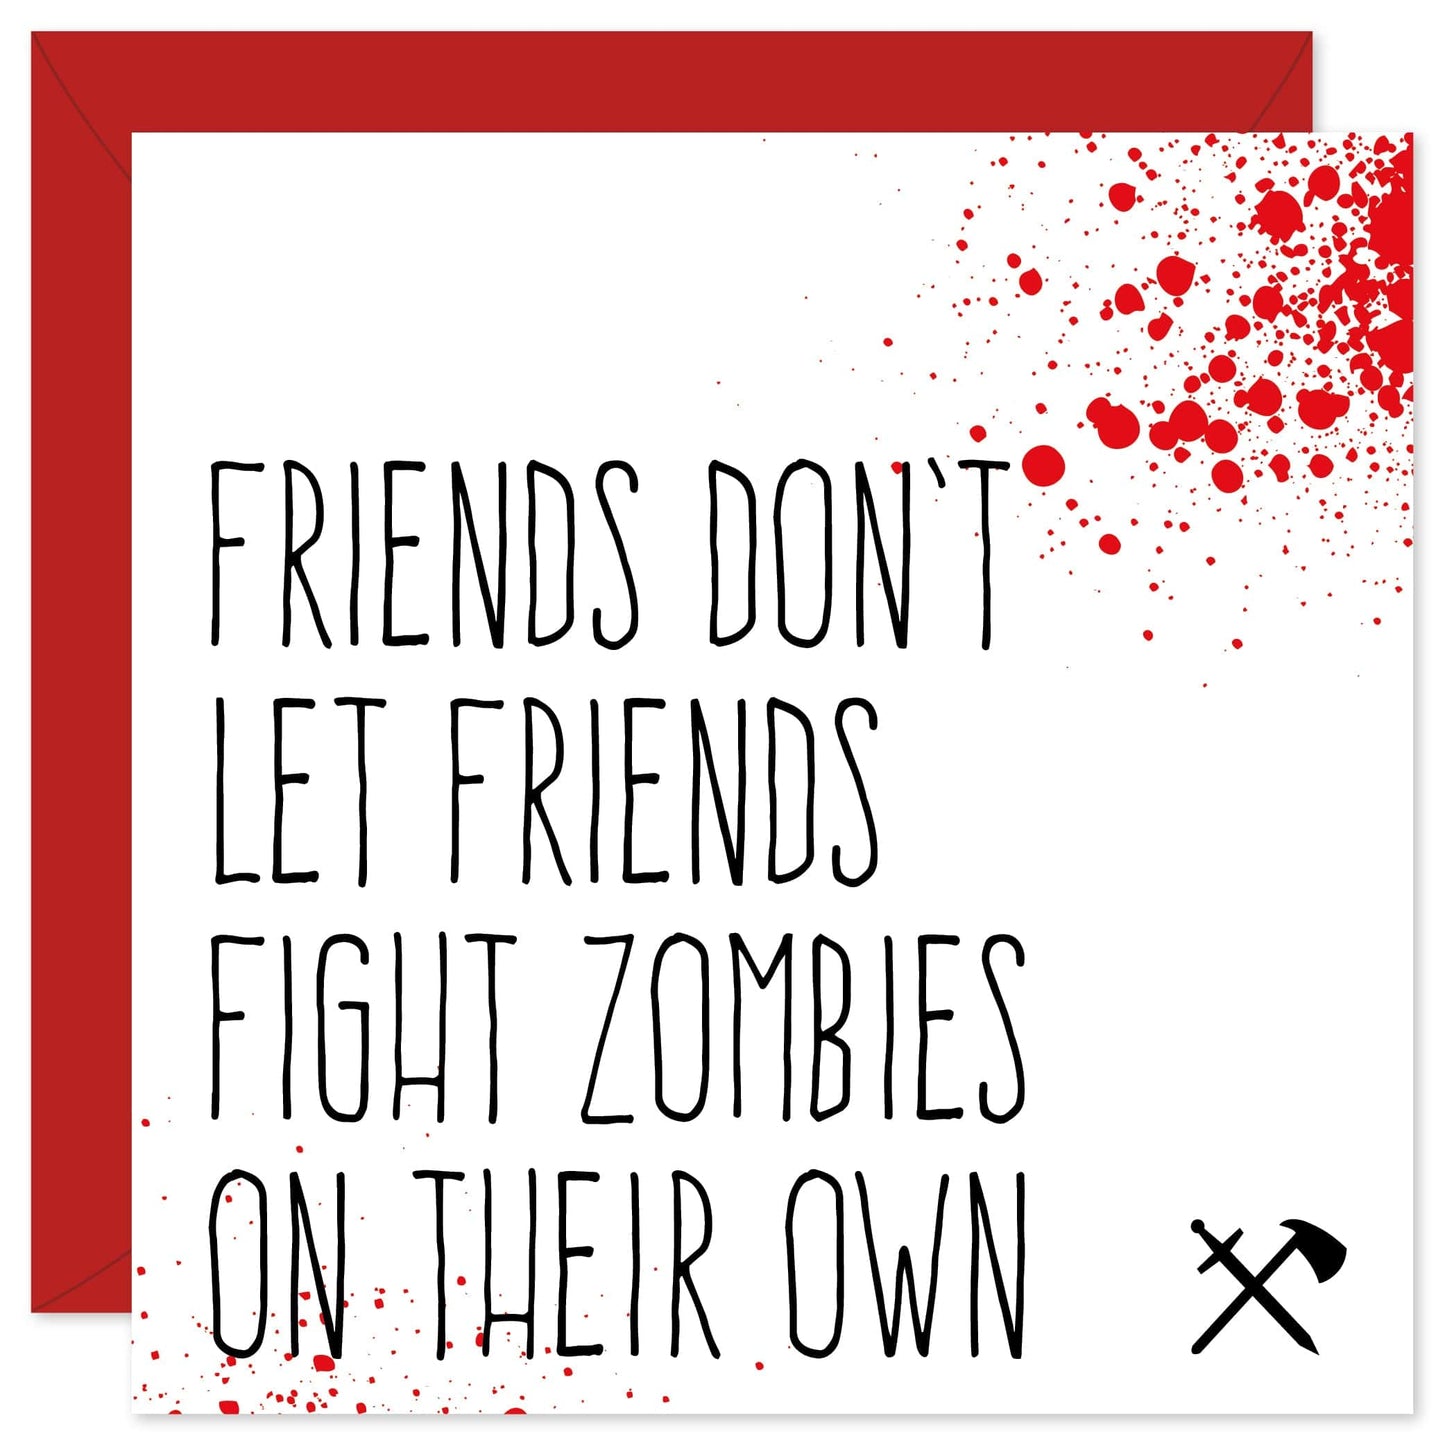 Friends don't let friends fight zombies on their own